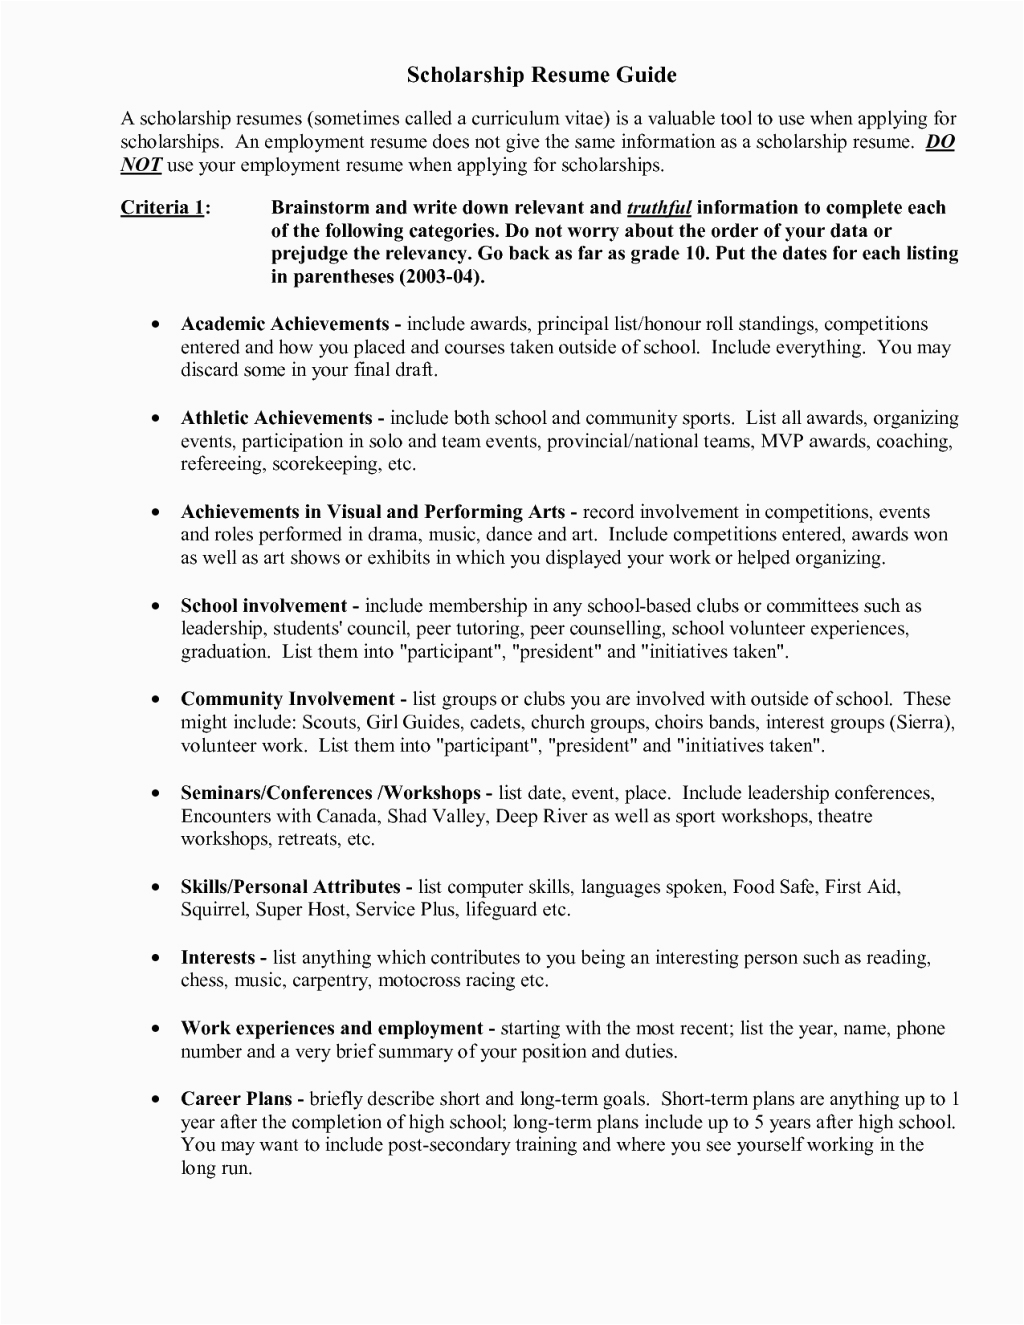 Resume Sample for Long Term Employment 12 13 Long Term Employment Resume Examples